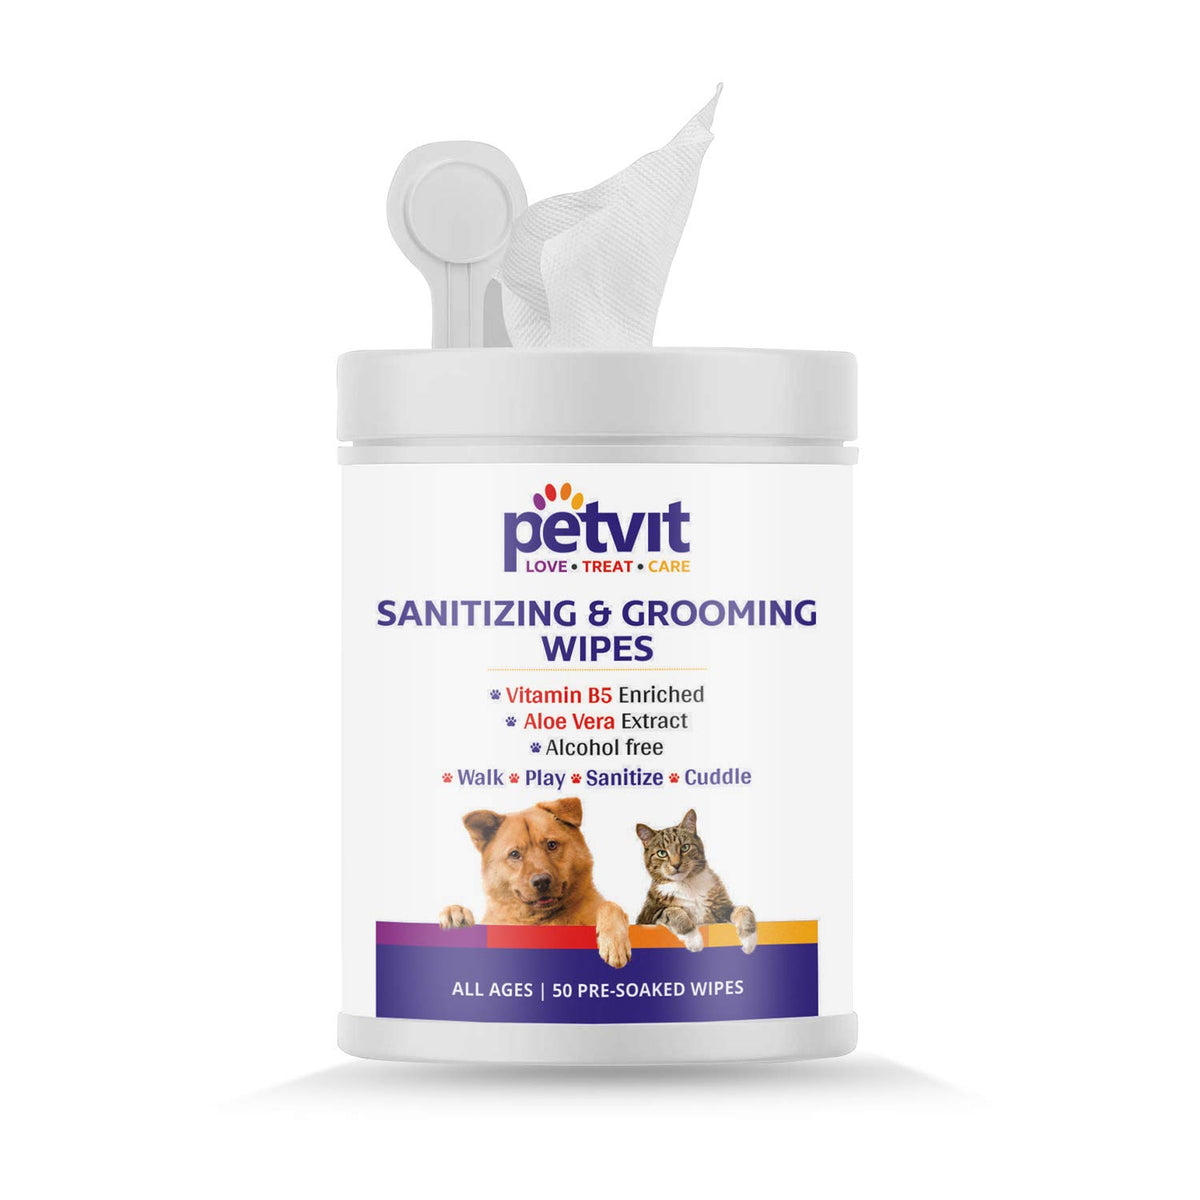 Petvit Sanitizing & Grooming Wipes for Dogs and Cats - Gentle Care | Dirt removal | Fragrance-Free wet wipes for cleaning pets (50 Wipes)